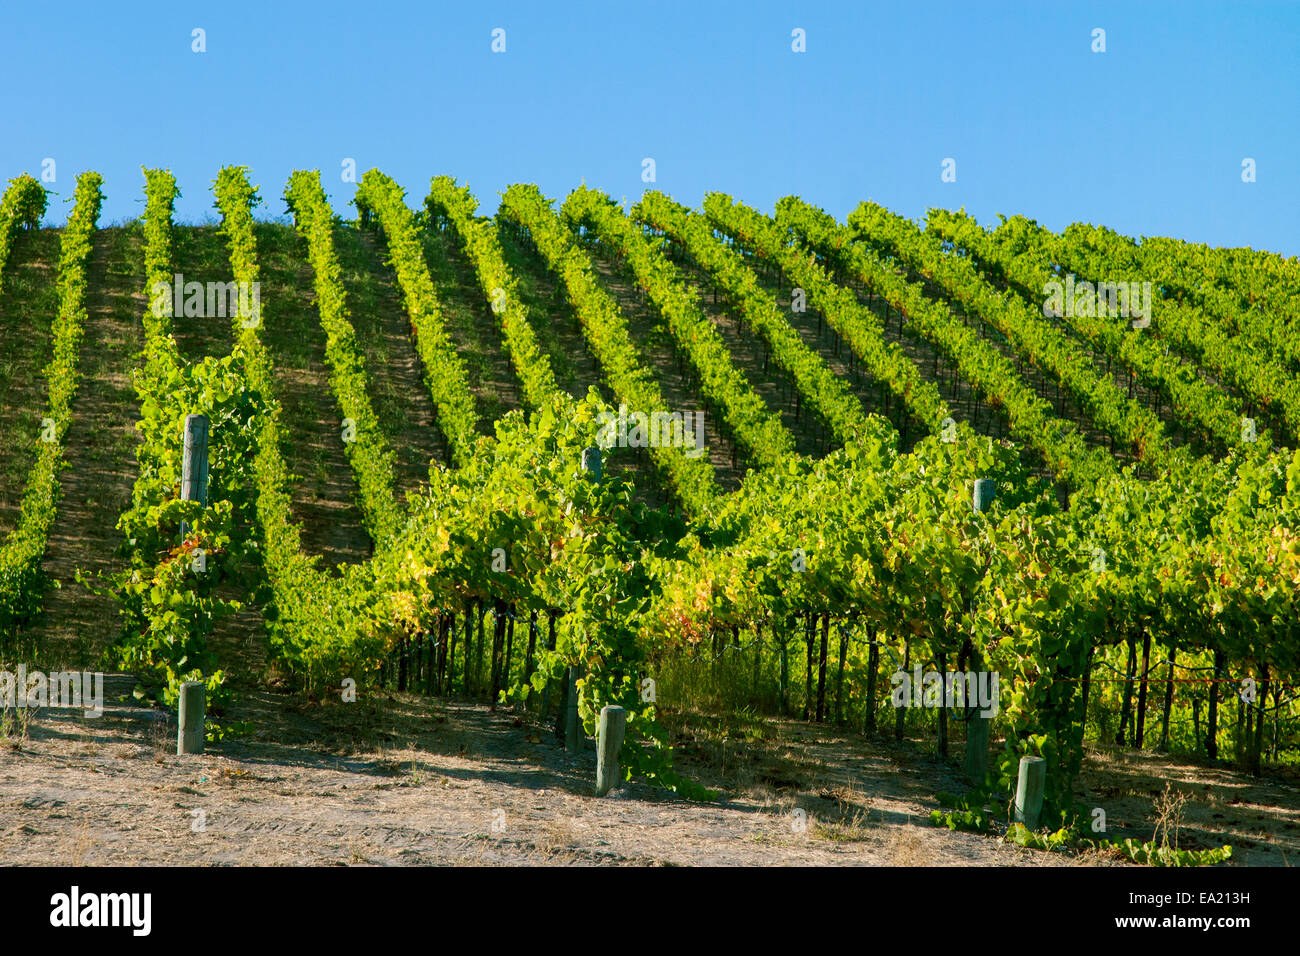 Agriculture - Rolling midsummer wine grape vineyard/ near Clements, California, USA. Stock Photo